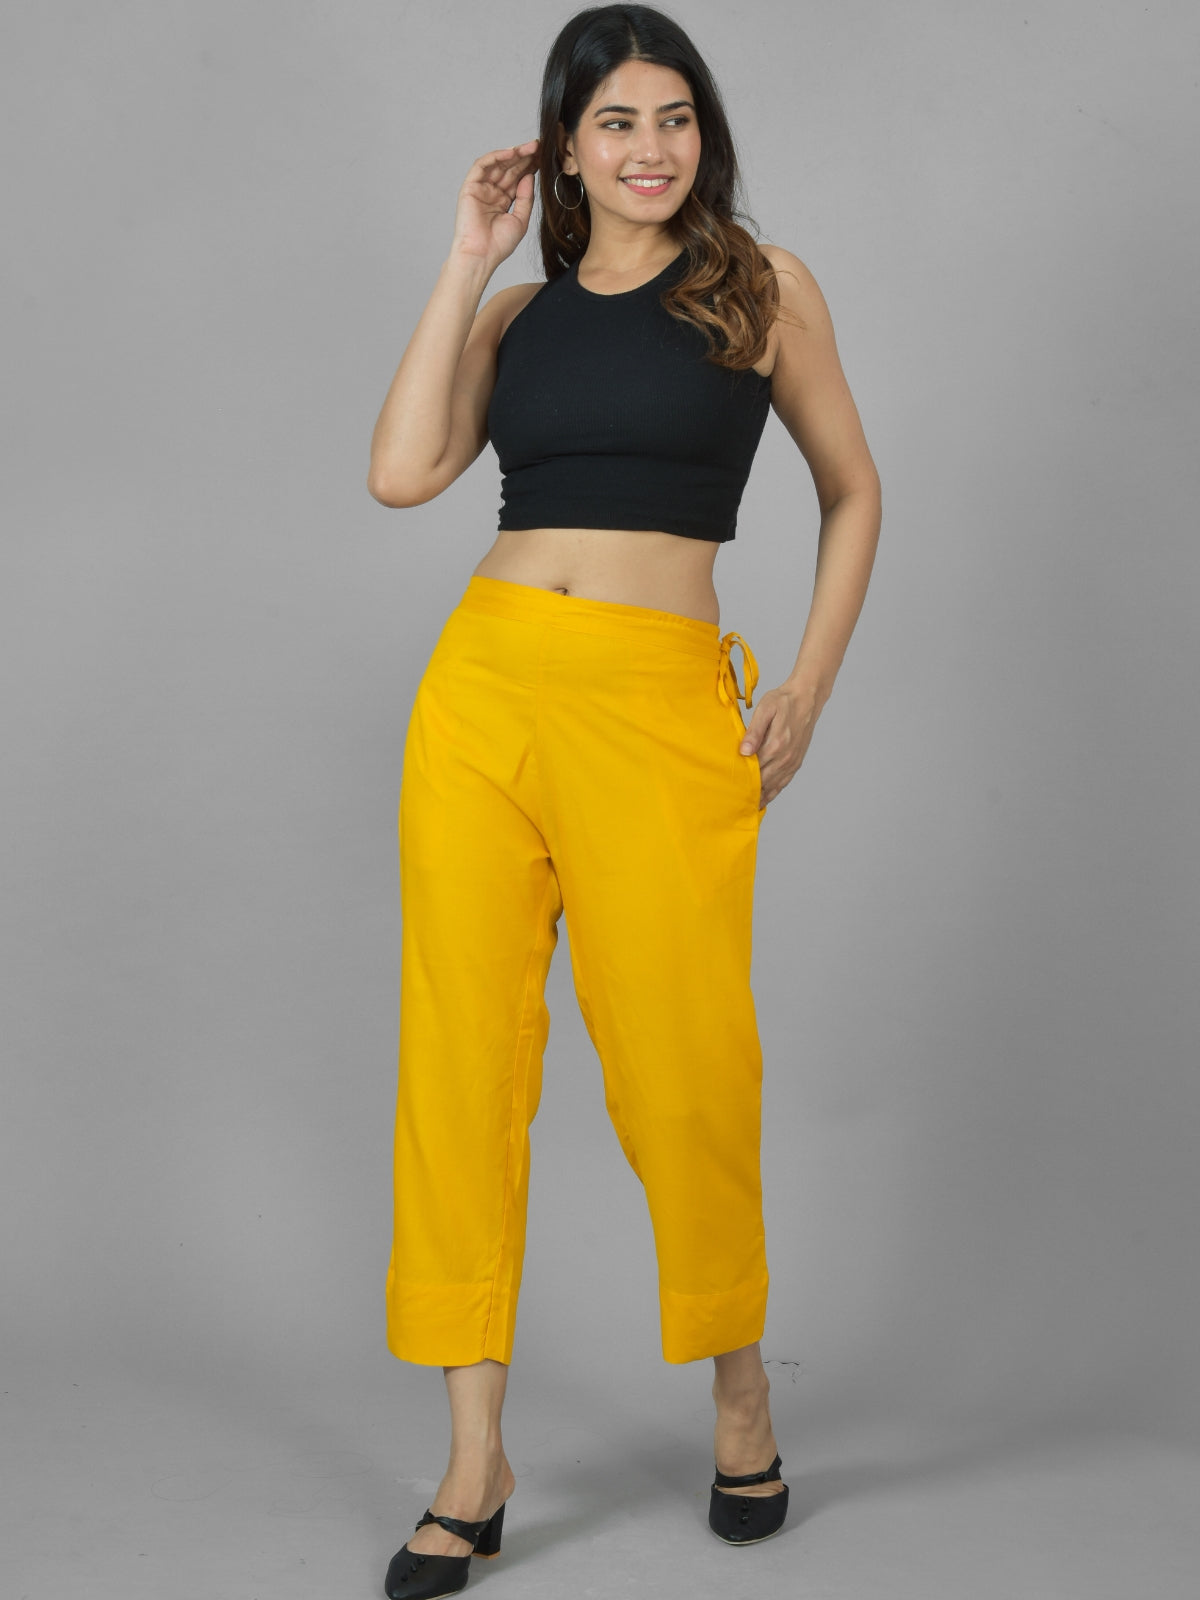 Women Solid Mustard Rayon Culottes Trouser